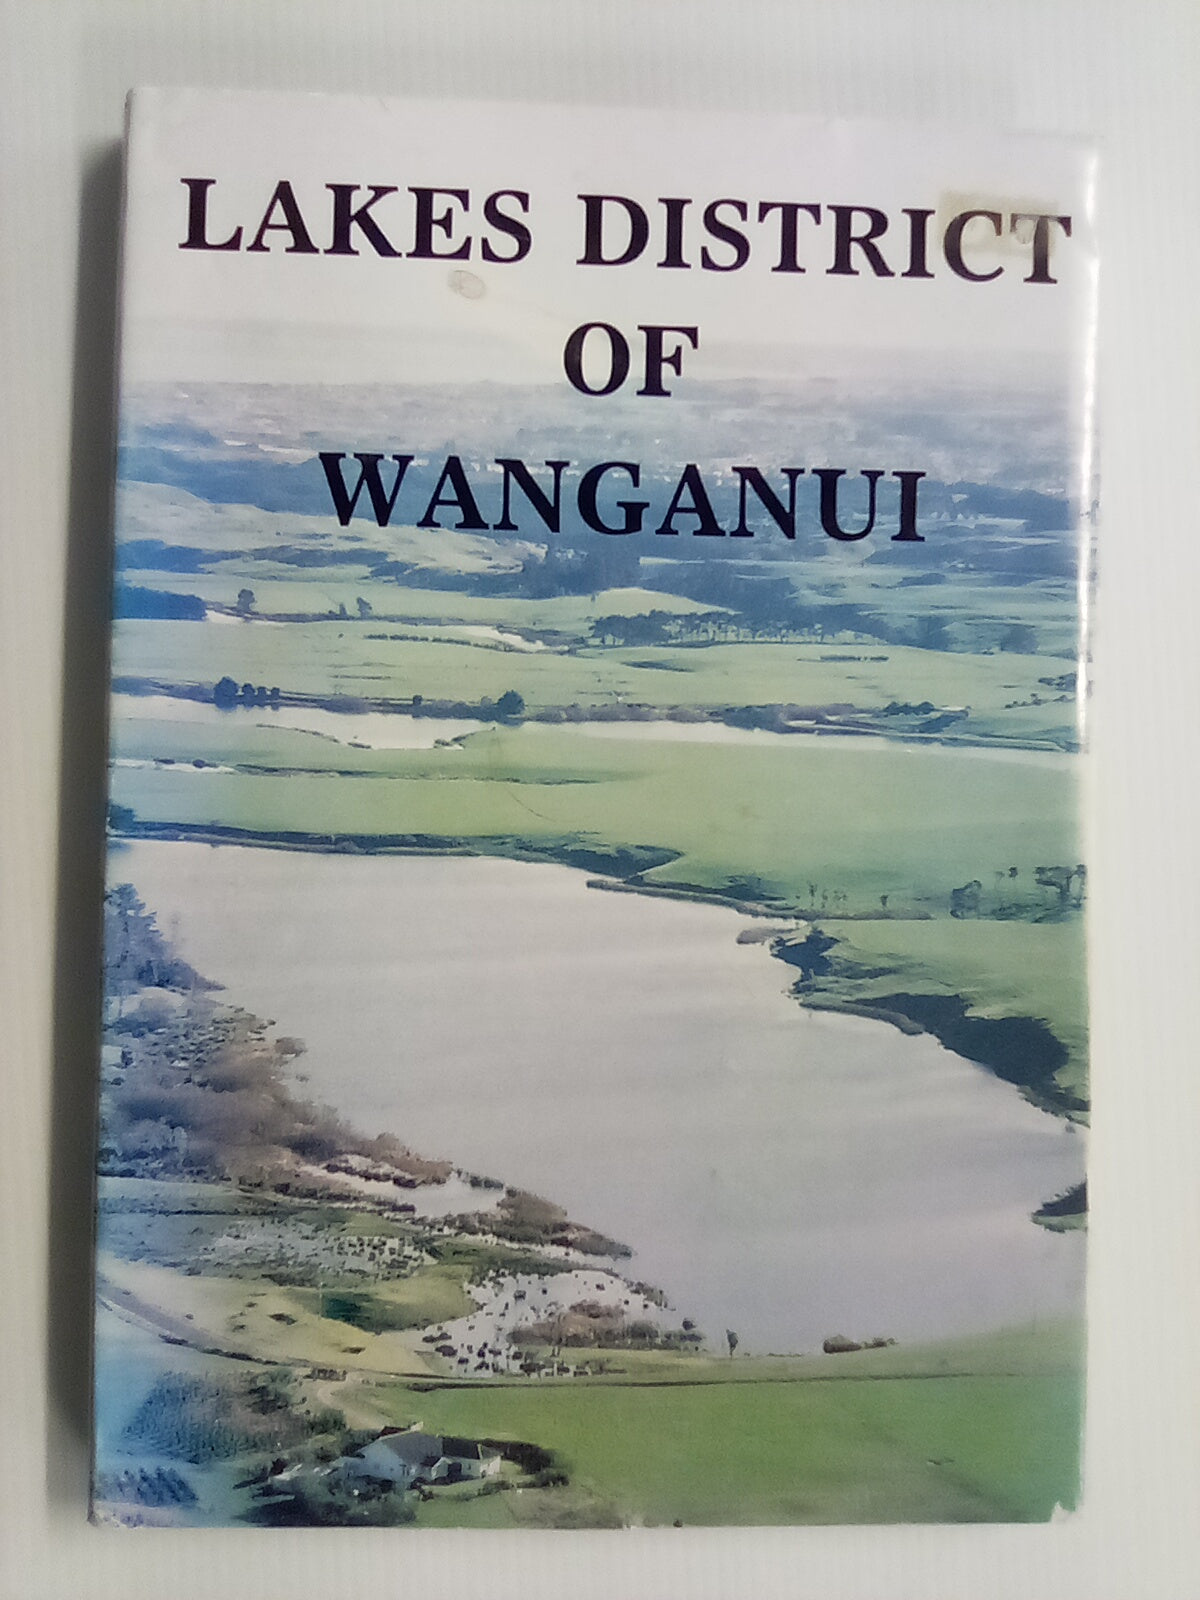 Lakes District of Wanganui (Edited) by Marie White